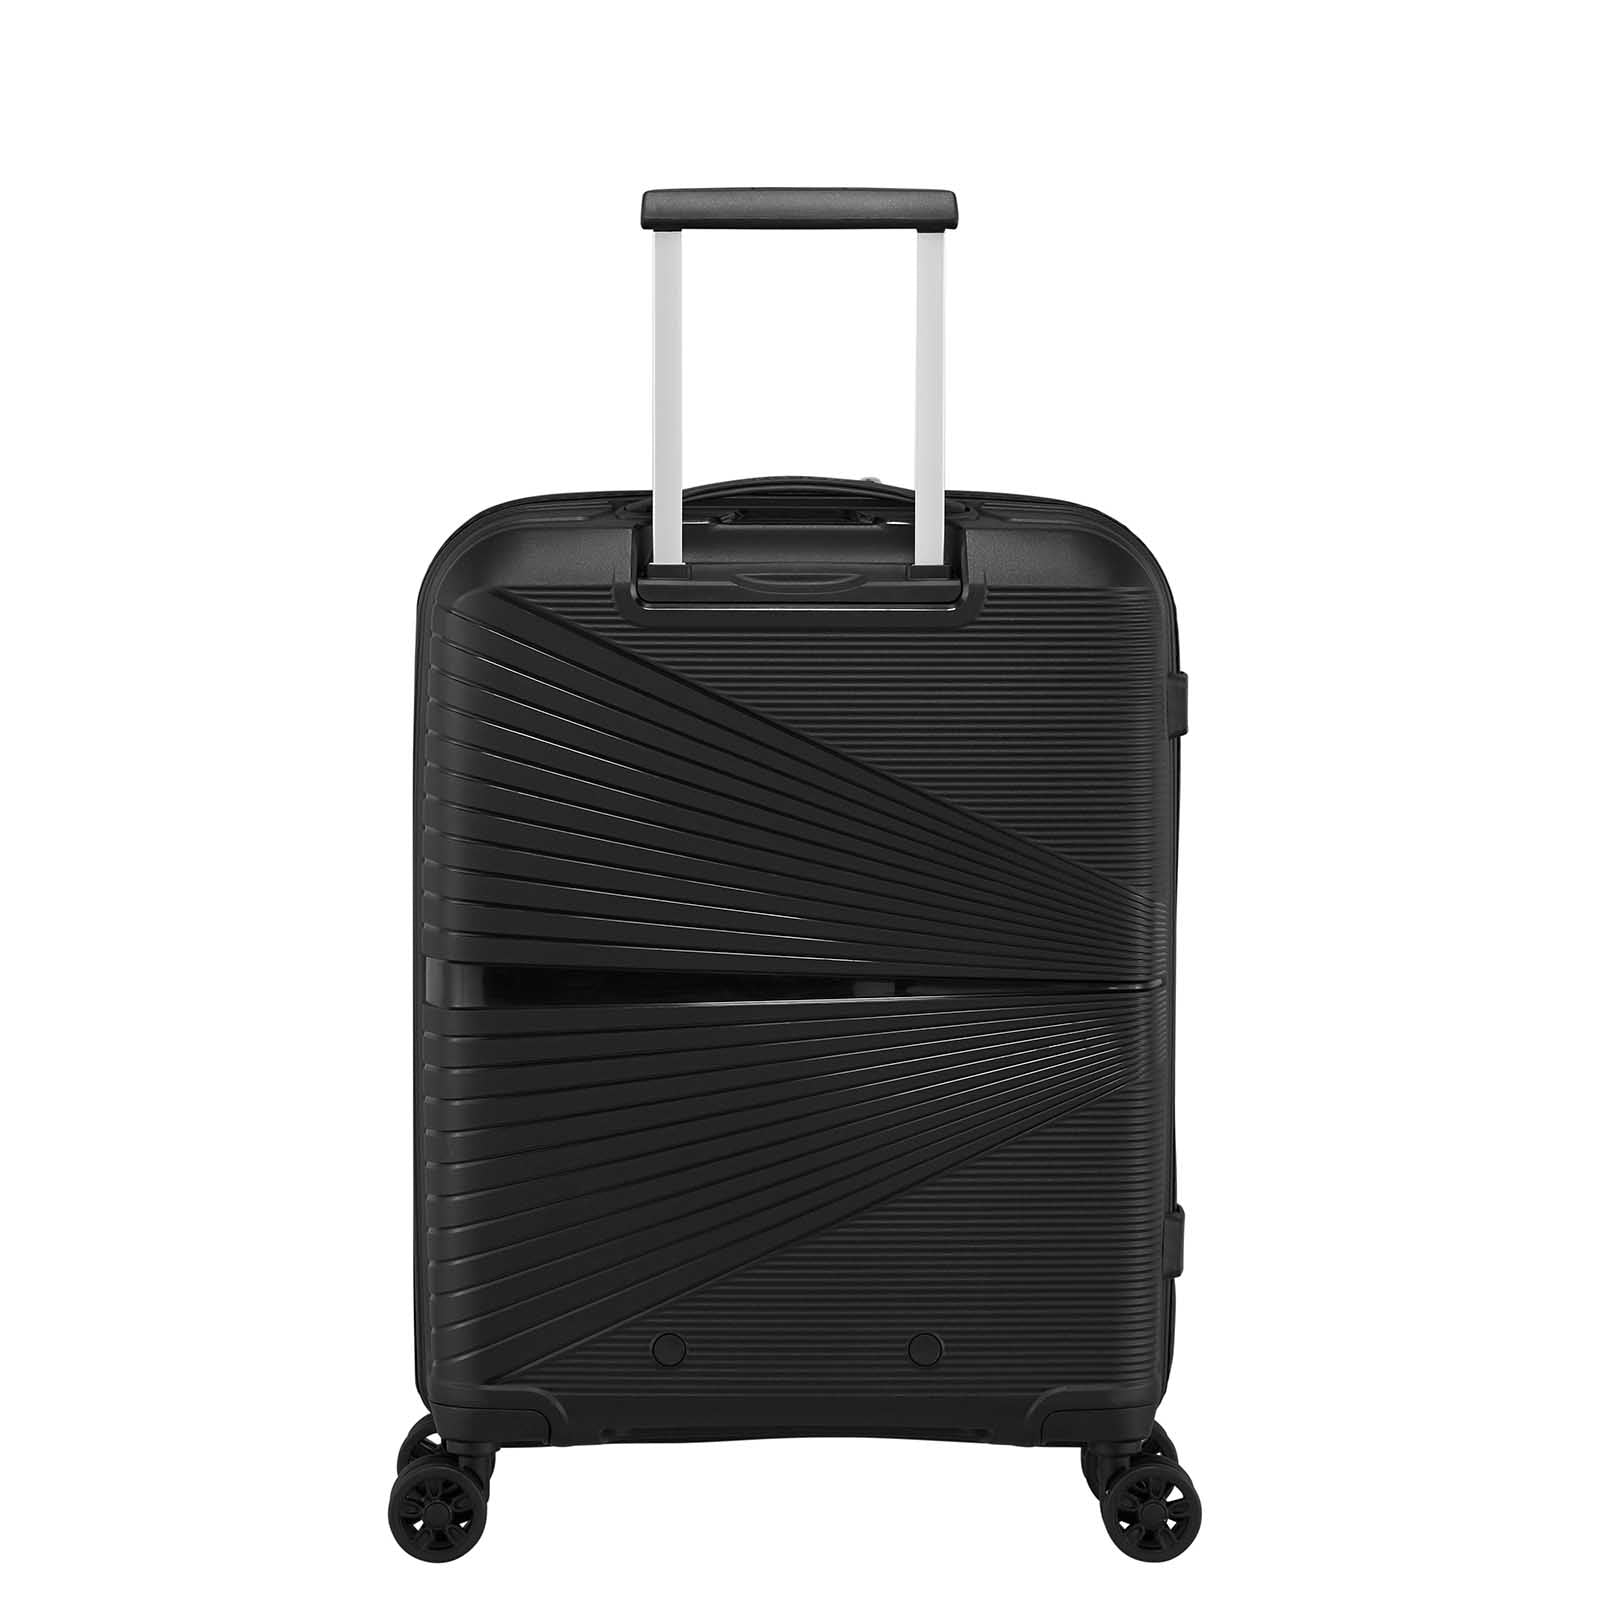 American-Tourister-Airconic-55cm-Carry-On-Suitcase-Onyx-Black-Back